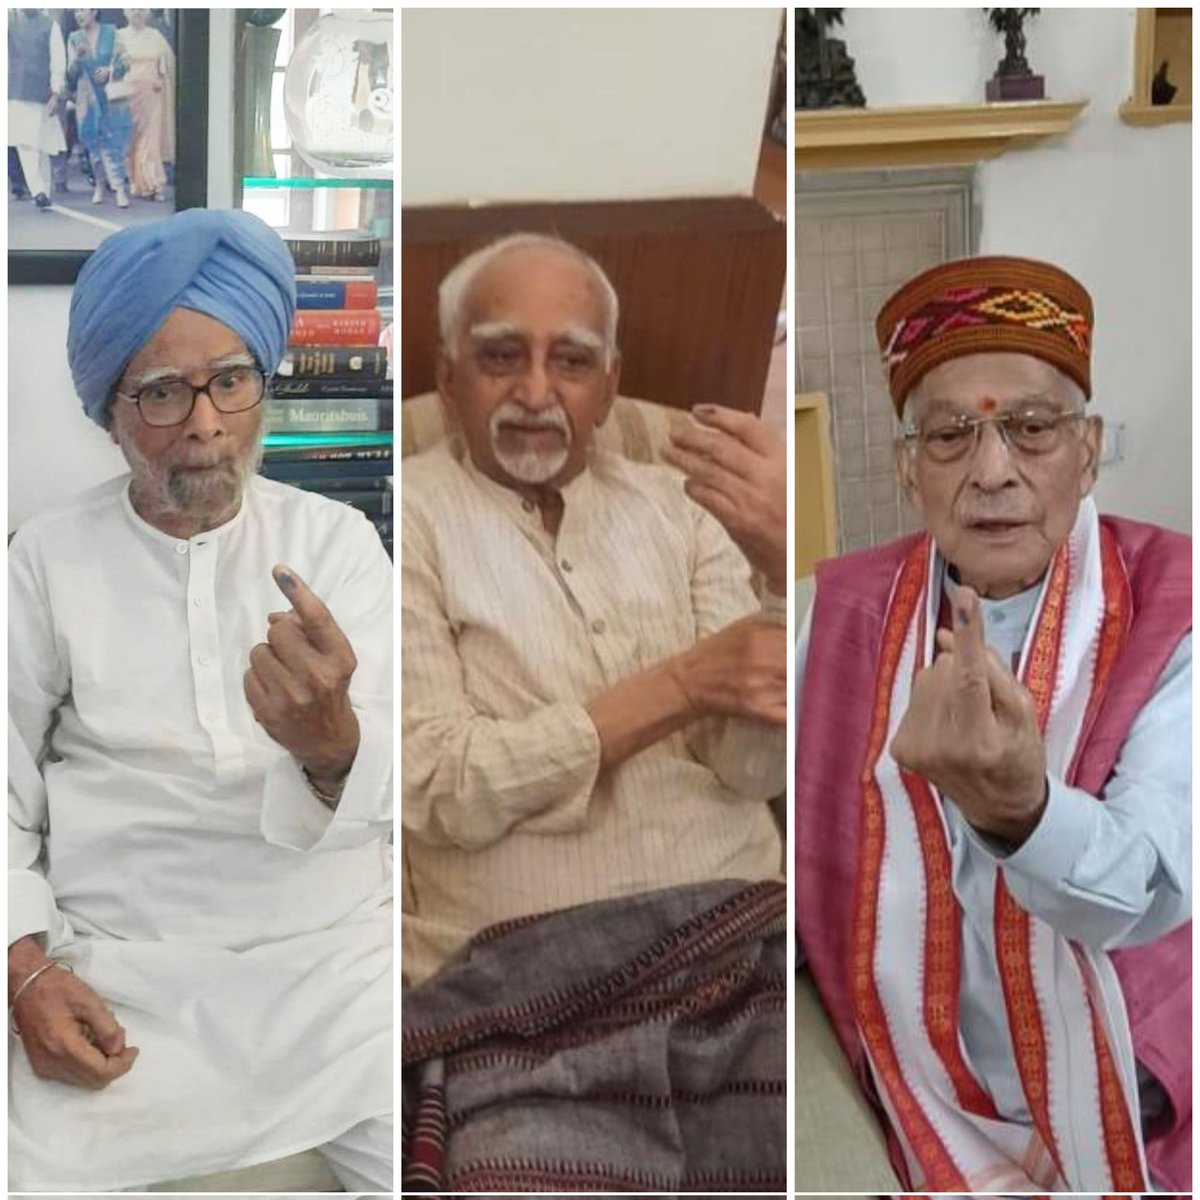 AAP New Delhi Loksabha Constituency Candidate Somnath Bharti received 3 'Important' Votes today. Former PM Manmohan Singh, Former Vice President Hamid Ansari and Former Union Minister Murli Manohar Joshi voted in their home. @attorneybharti @AAPDelhi